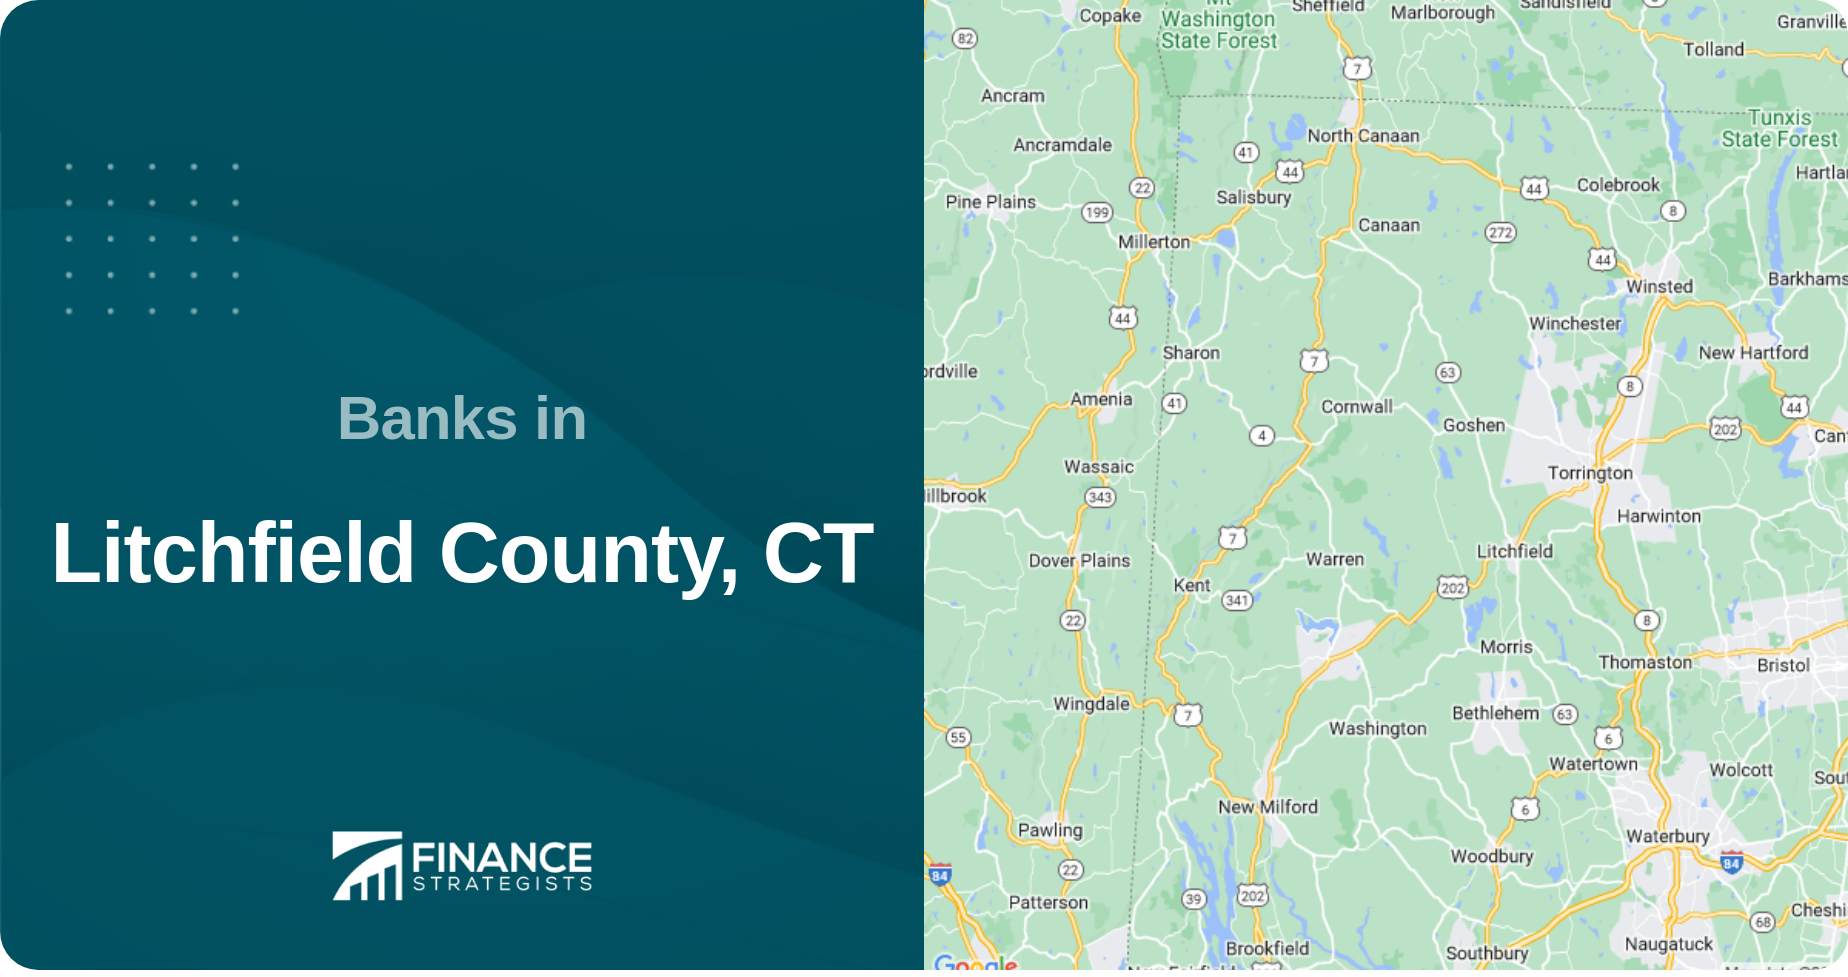 Banks in Litchfield County, CT